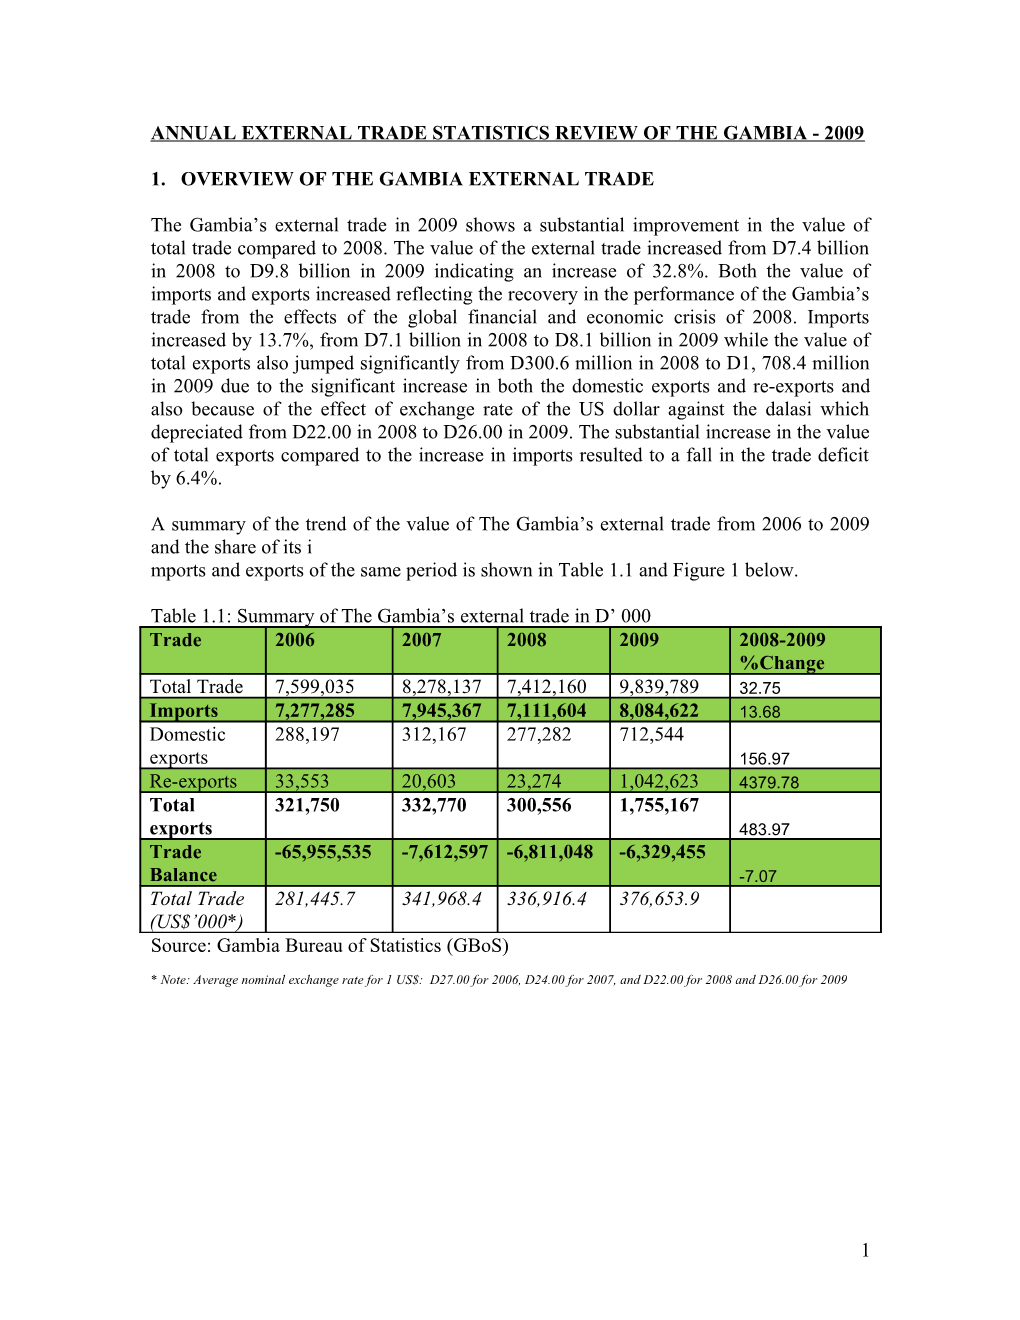 Annual External Trade Statistics Review of the Gambia - 2009